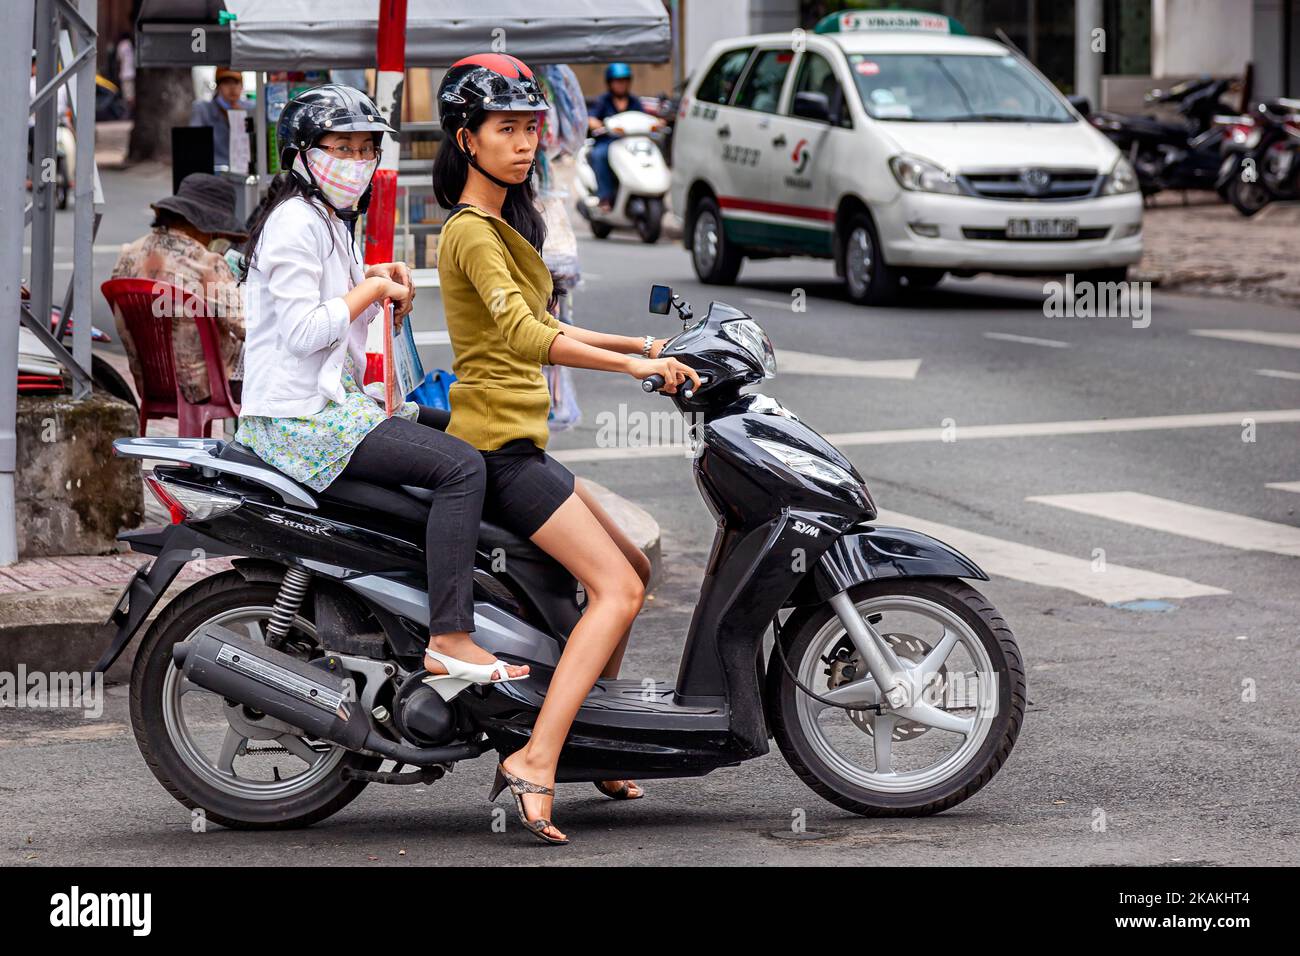 Attractive Vietnamese girls riding on motorcycle in traffic, Ho Chi Minh City, Vietnam Stock Photo